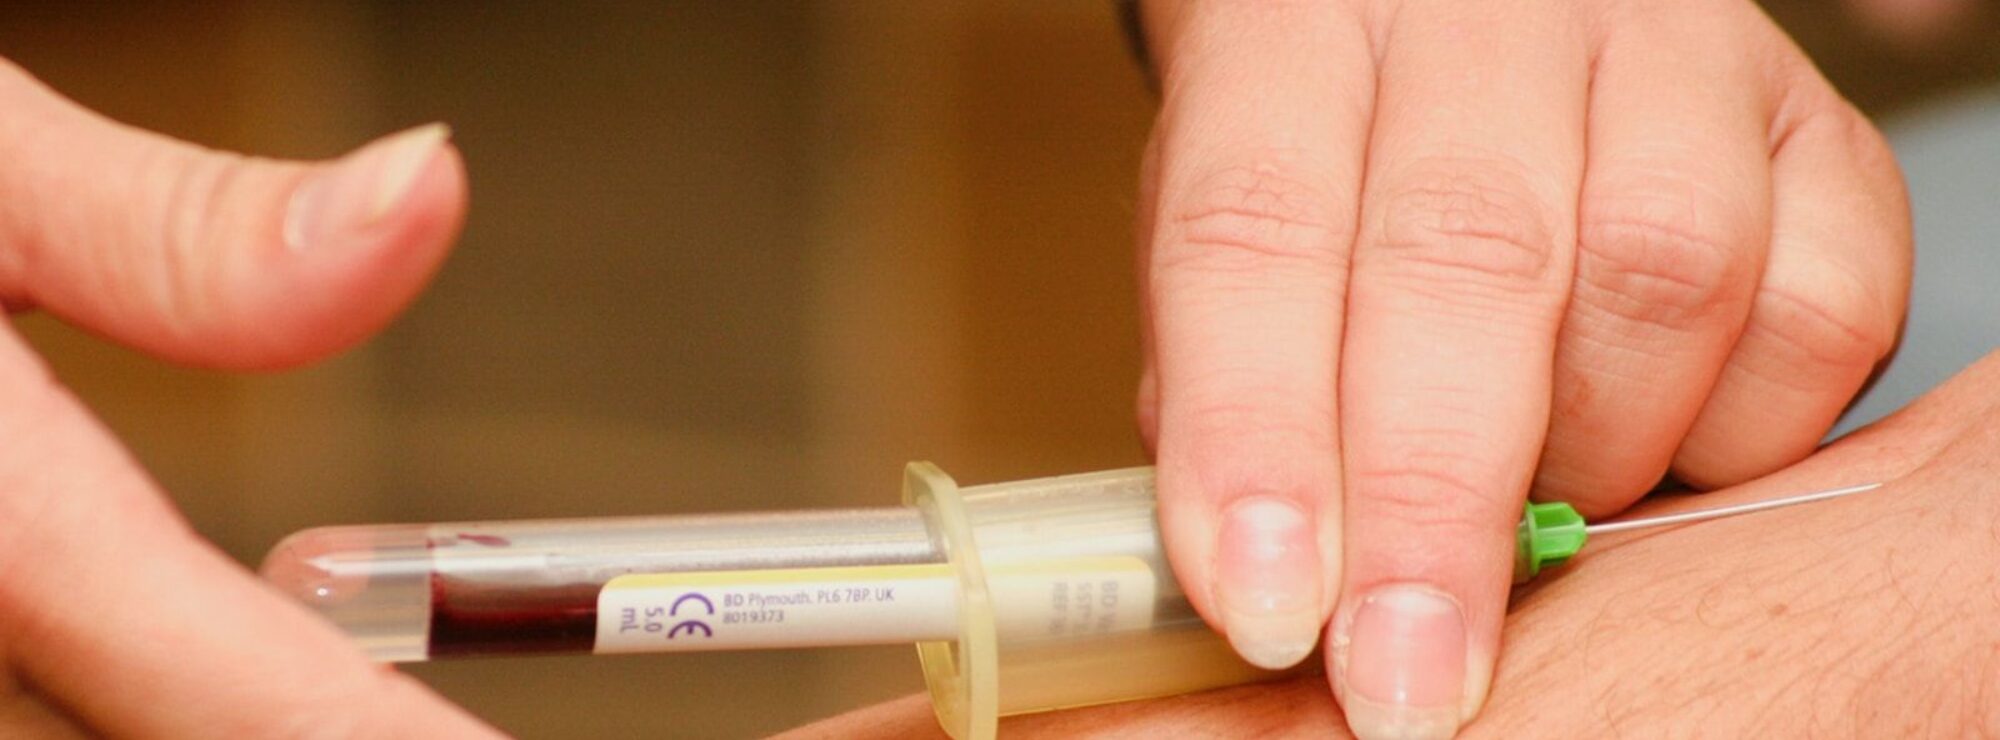 person injecting syringe